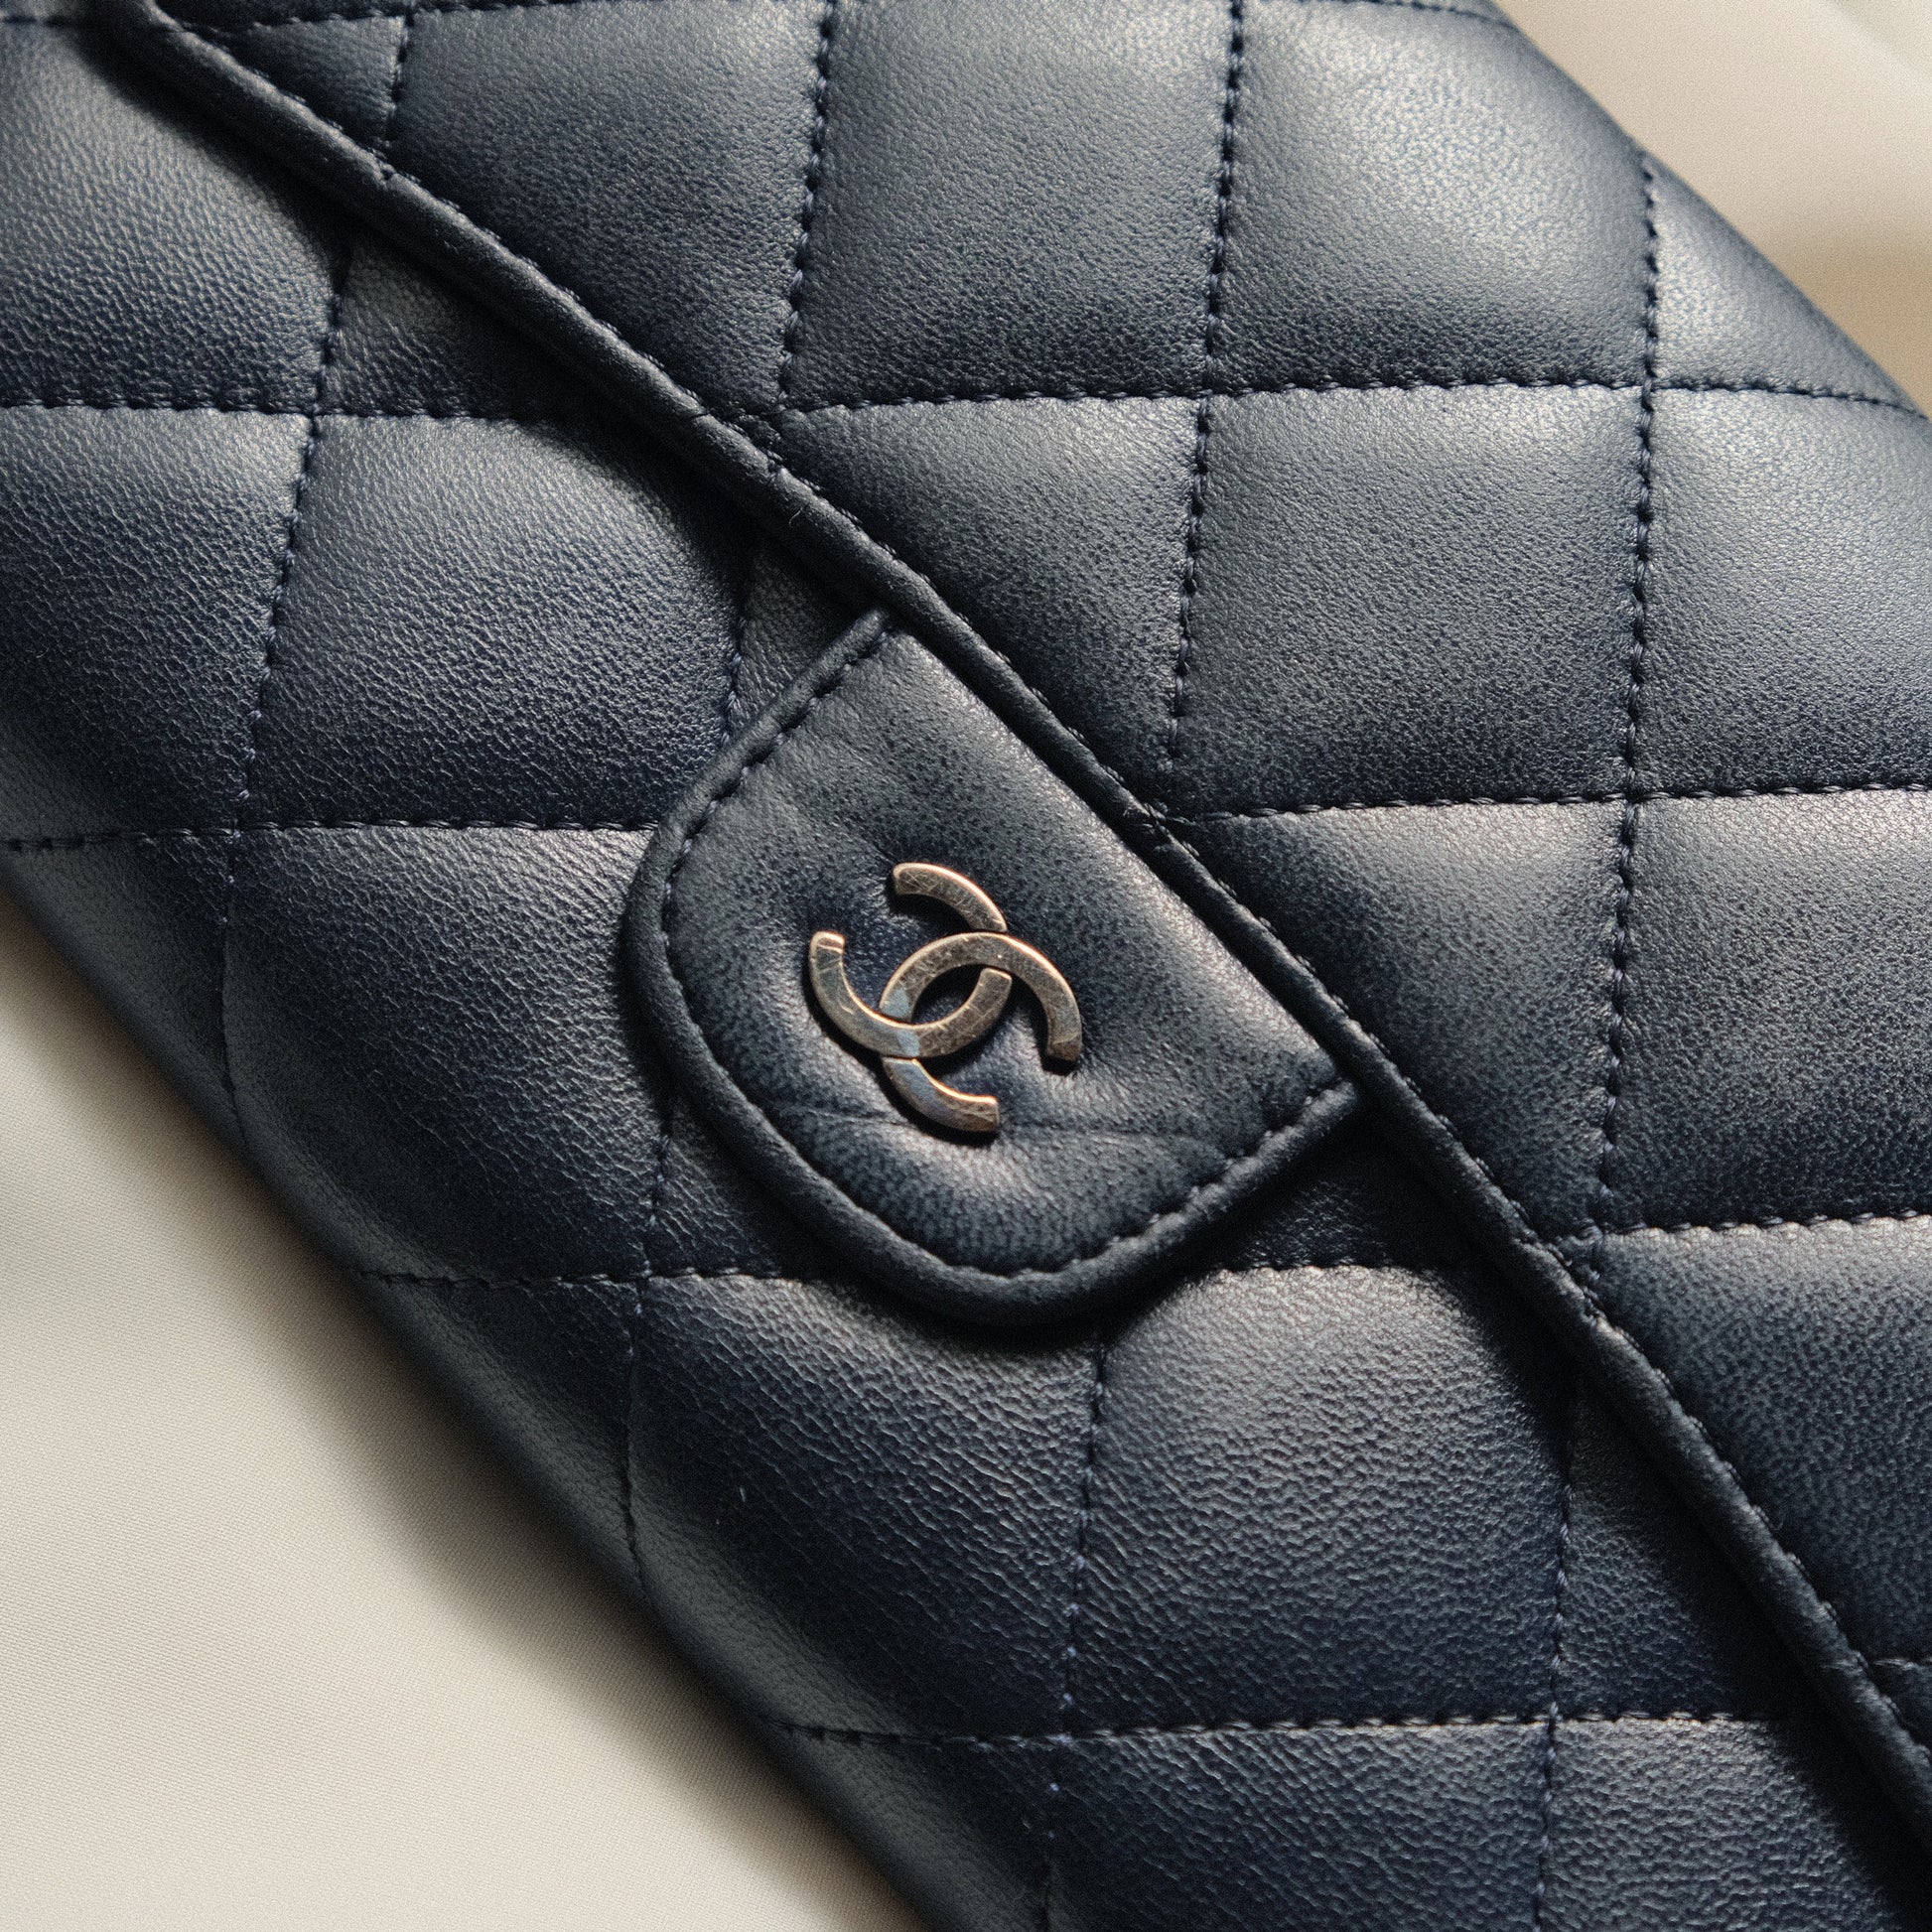 With dust bag] Second-hand Chanel black caviar leather WOC long